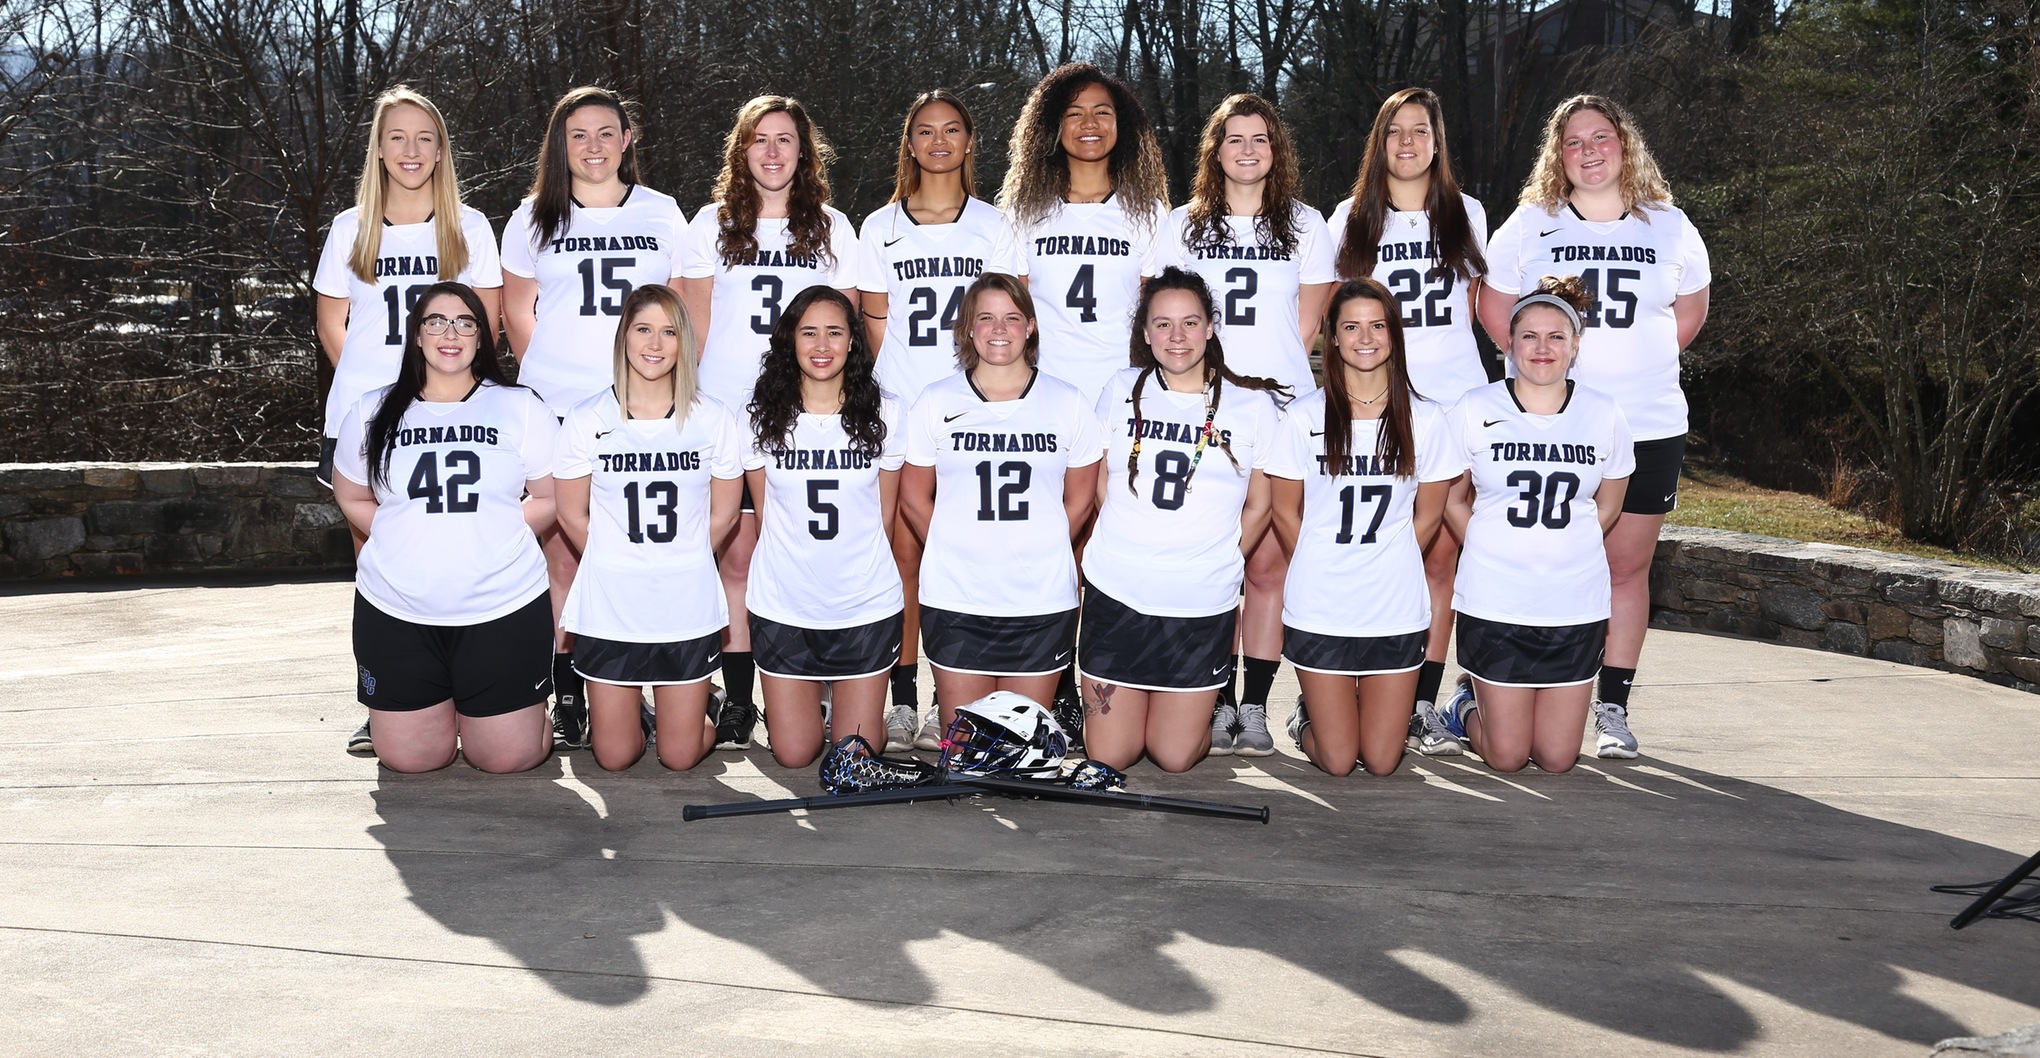 Women's Lacrosse Named to 2018 IWLCA Zag Sports Academic Honor Squad